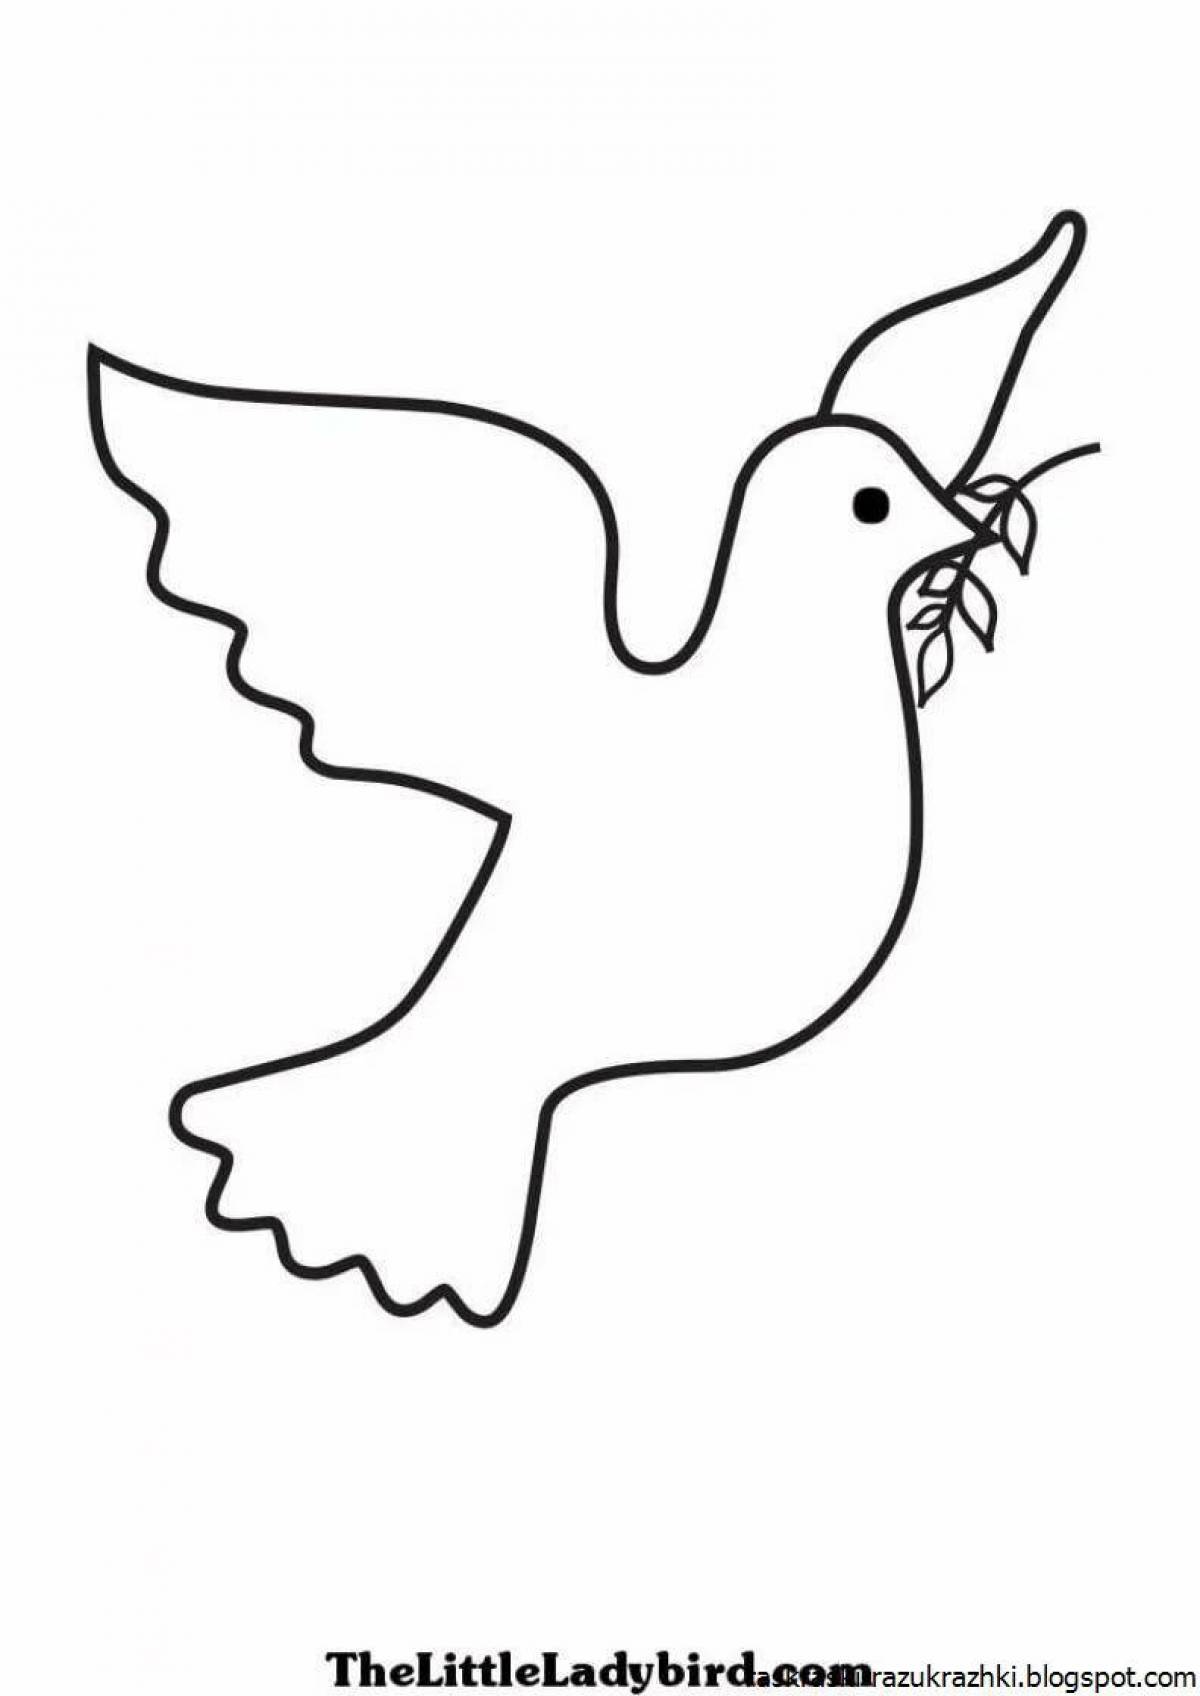 Coloring book dazzling dove for kids